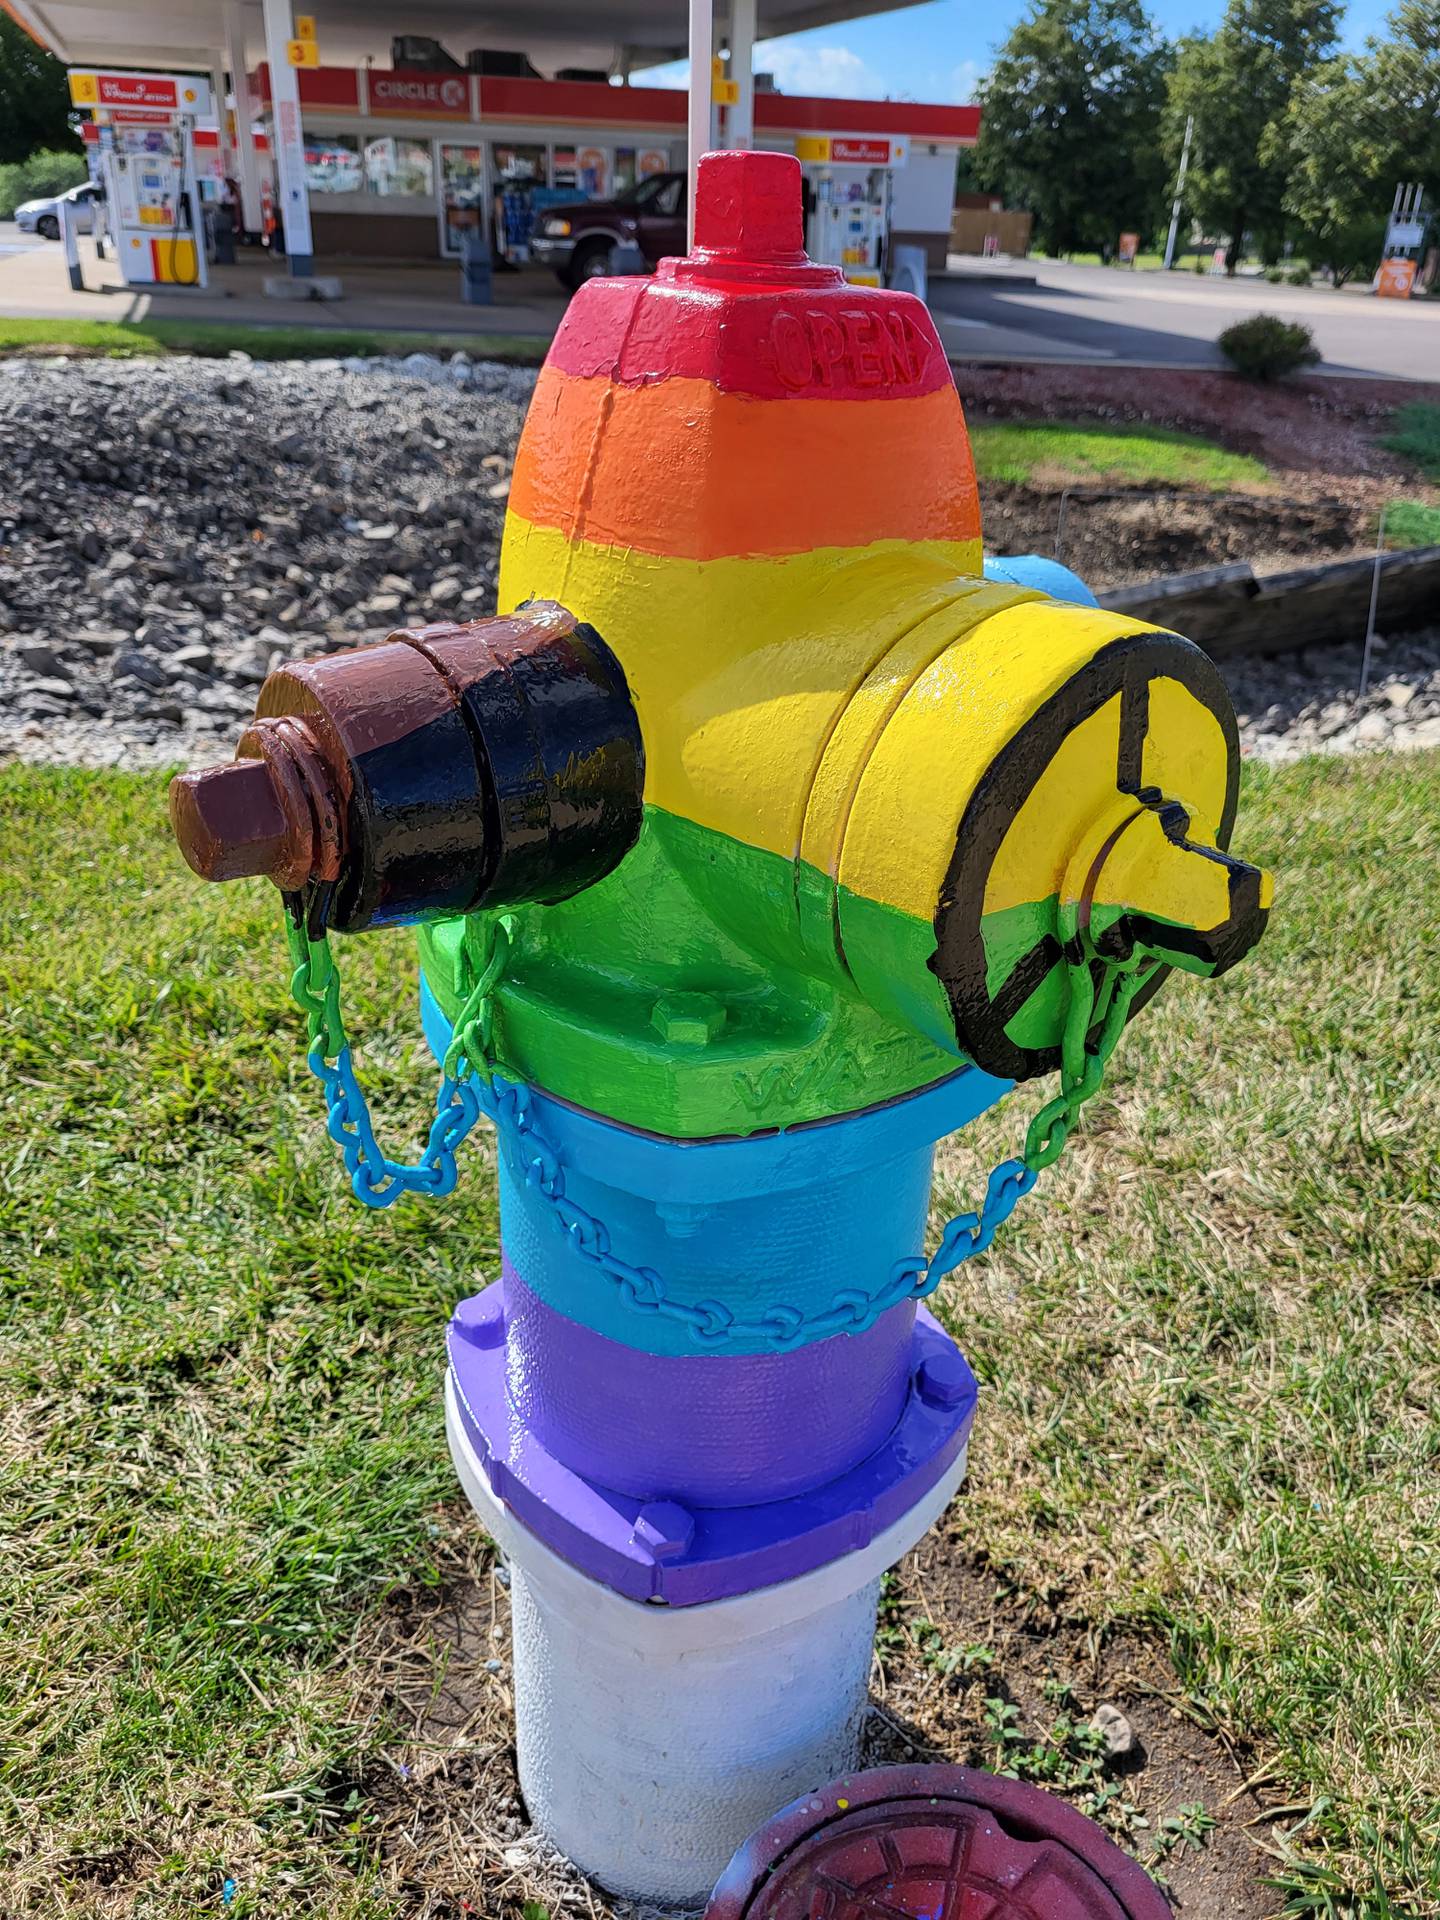 Chrissy Swanson’s pride and transgender-painted fire hydrant at State Street at Kirk Road in Geneva has been vandalized four times. Swanson repainted it after it was spray painted red on July 23, then it had paint scraped off by July 24. Swanson vowed to continue to repaint it.